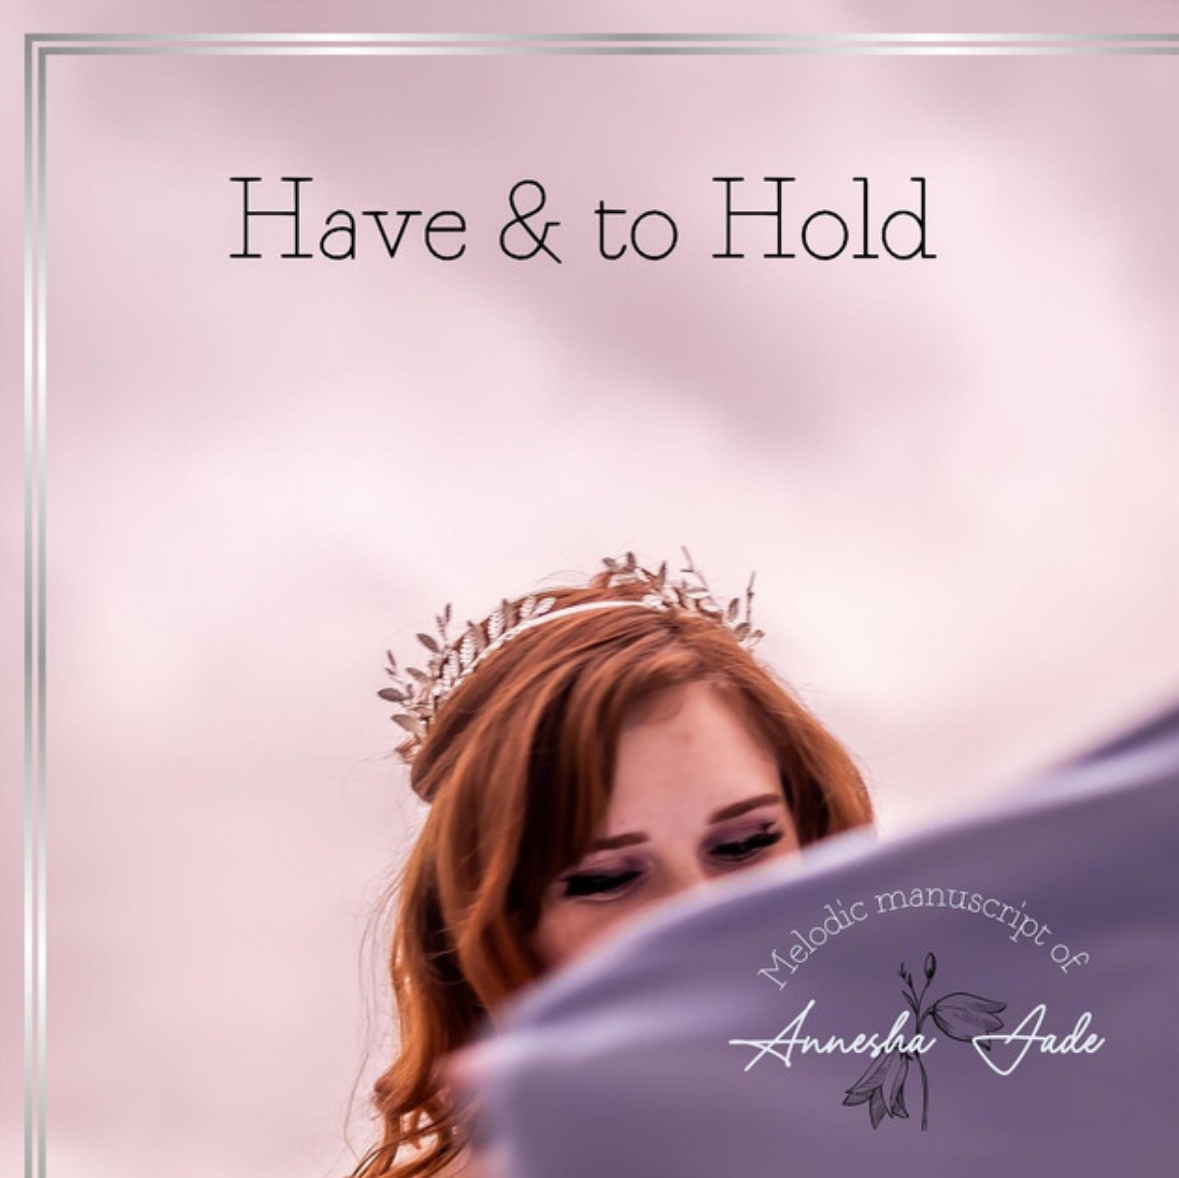 Have & to Hold, Annesha Jade, single, song, music, music review, review